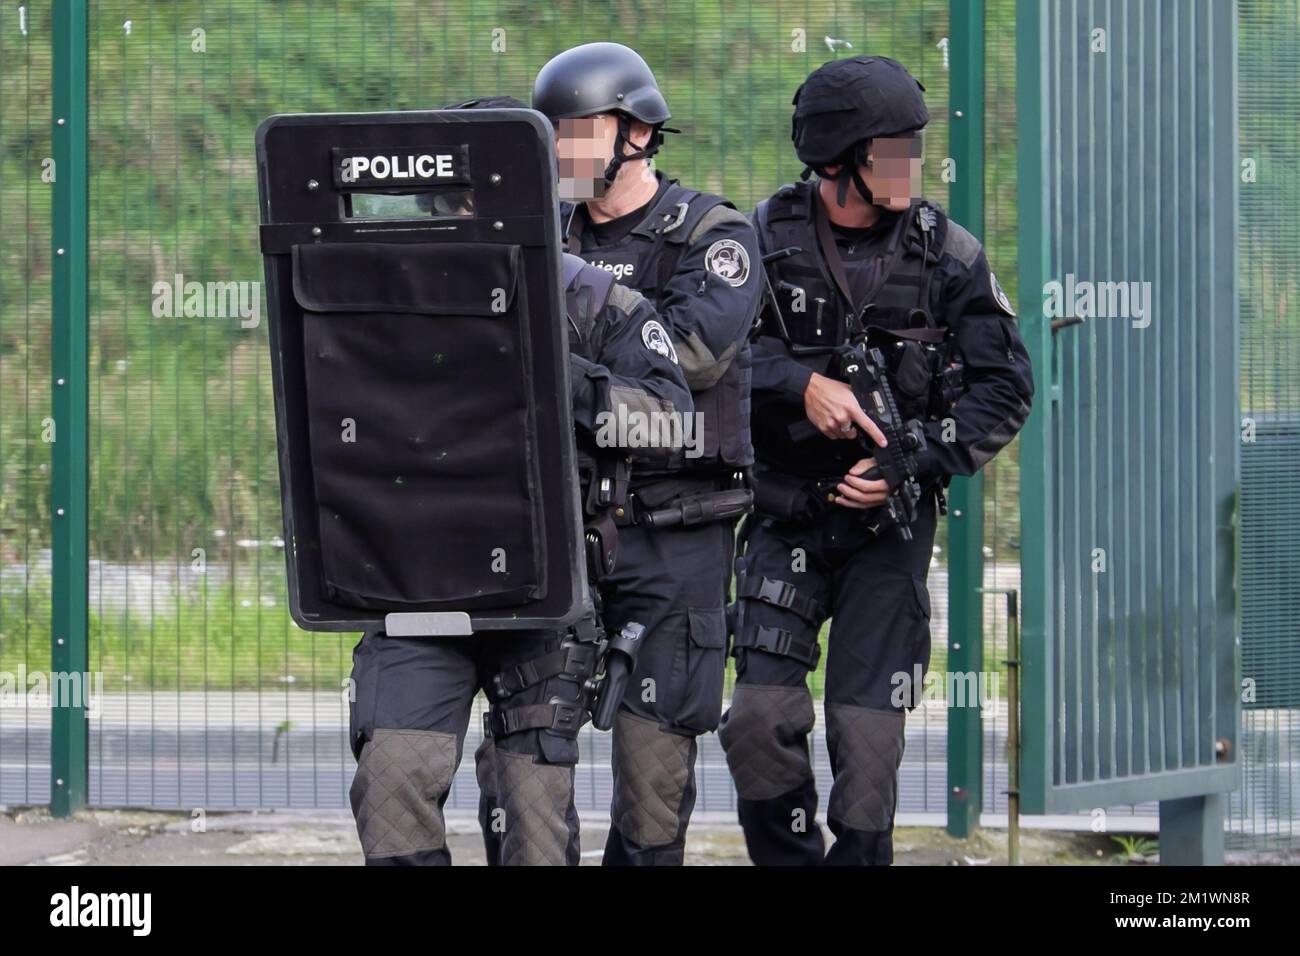 20141020 - LIEGE, BELGIUM: Illustration picture shows police at the Sclessin stadium of Belgian soccer team Standard de Liege, after a robbery took place this morning, Monday 20 October 2014. BELGA PHOTO NICOLAS LAMBERT Stock Photo